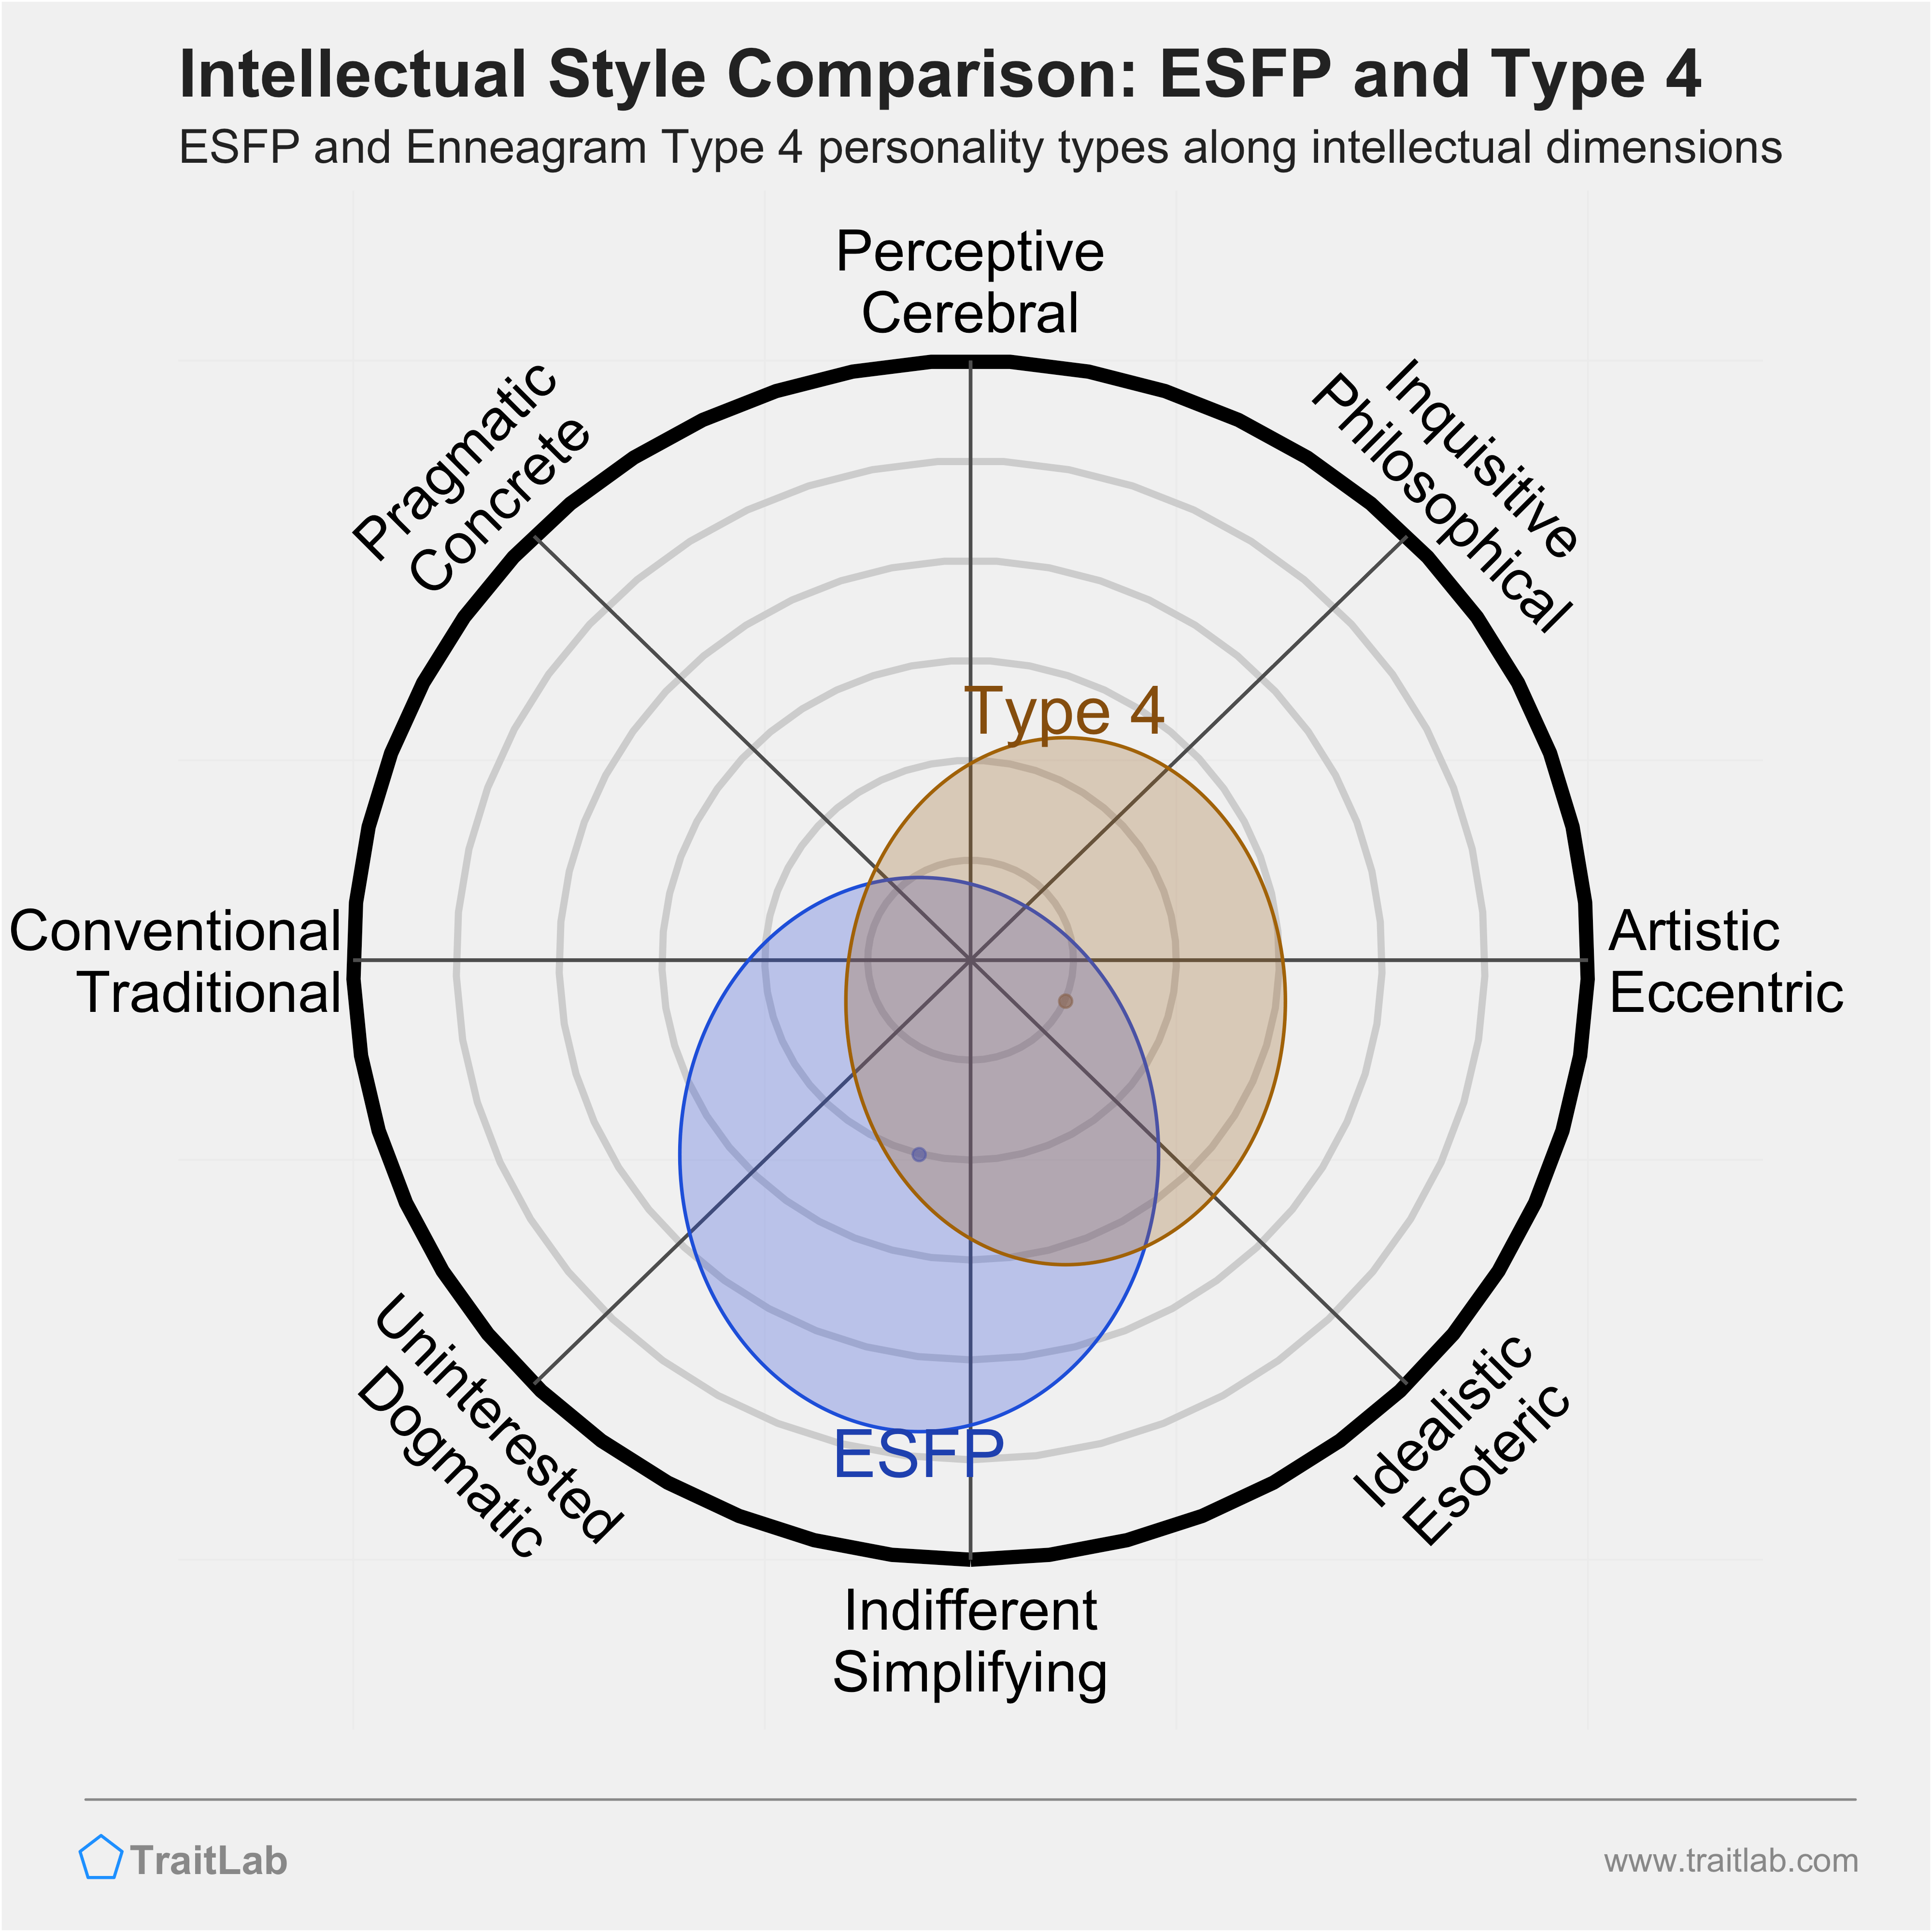 ESFP and Type 4 comparison across intellectual dimensions